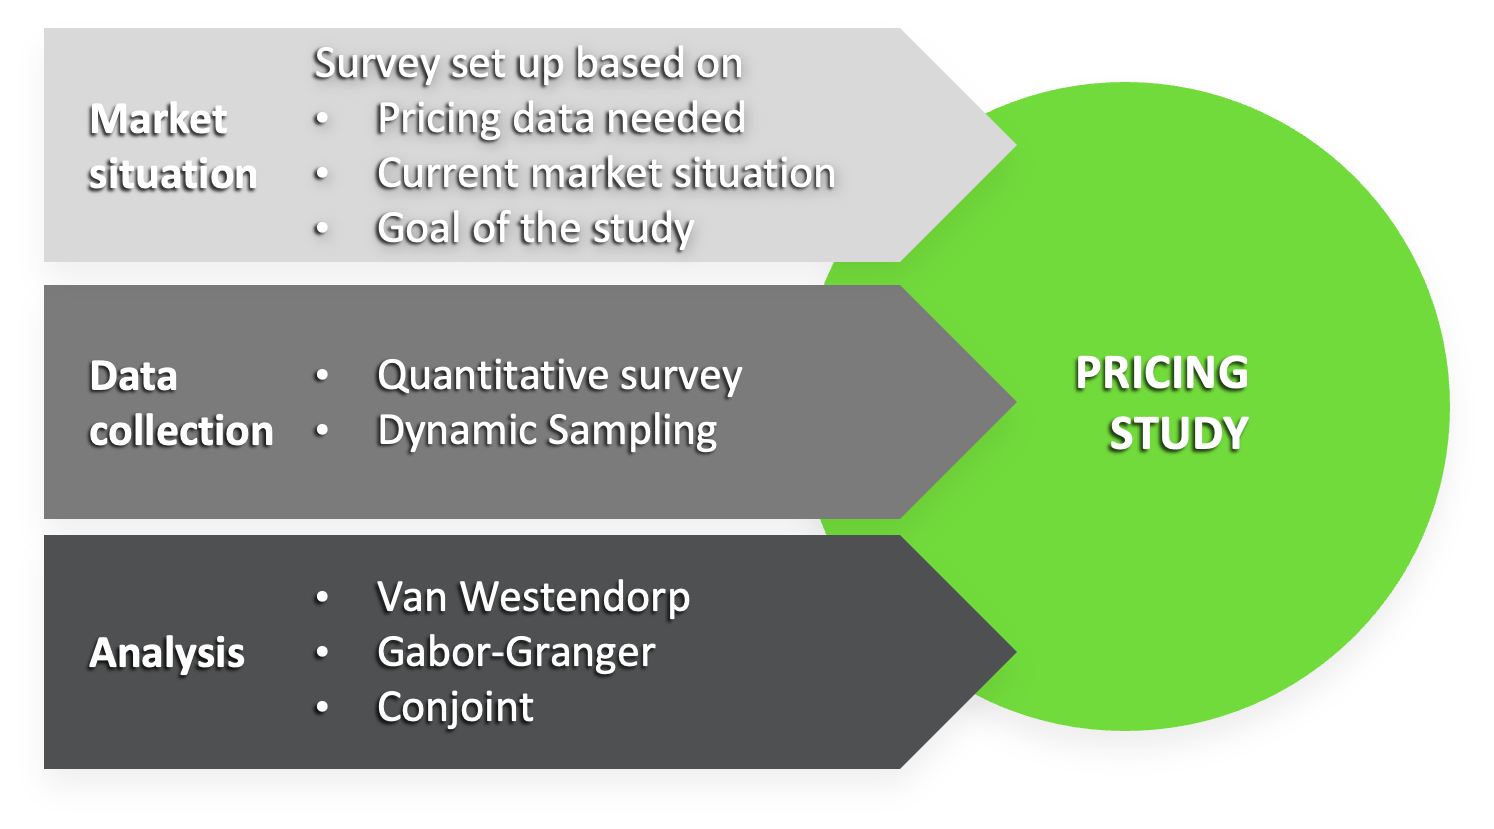 Gabor-Granger Pricing Method - Conjointly